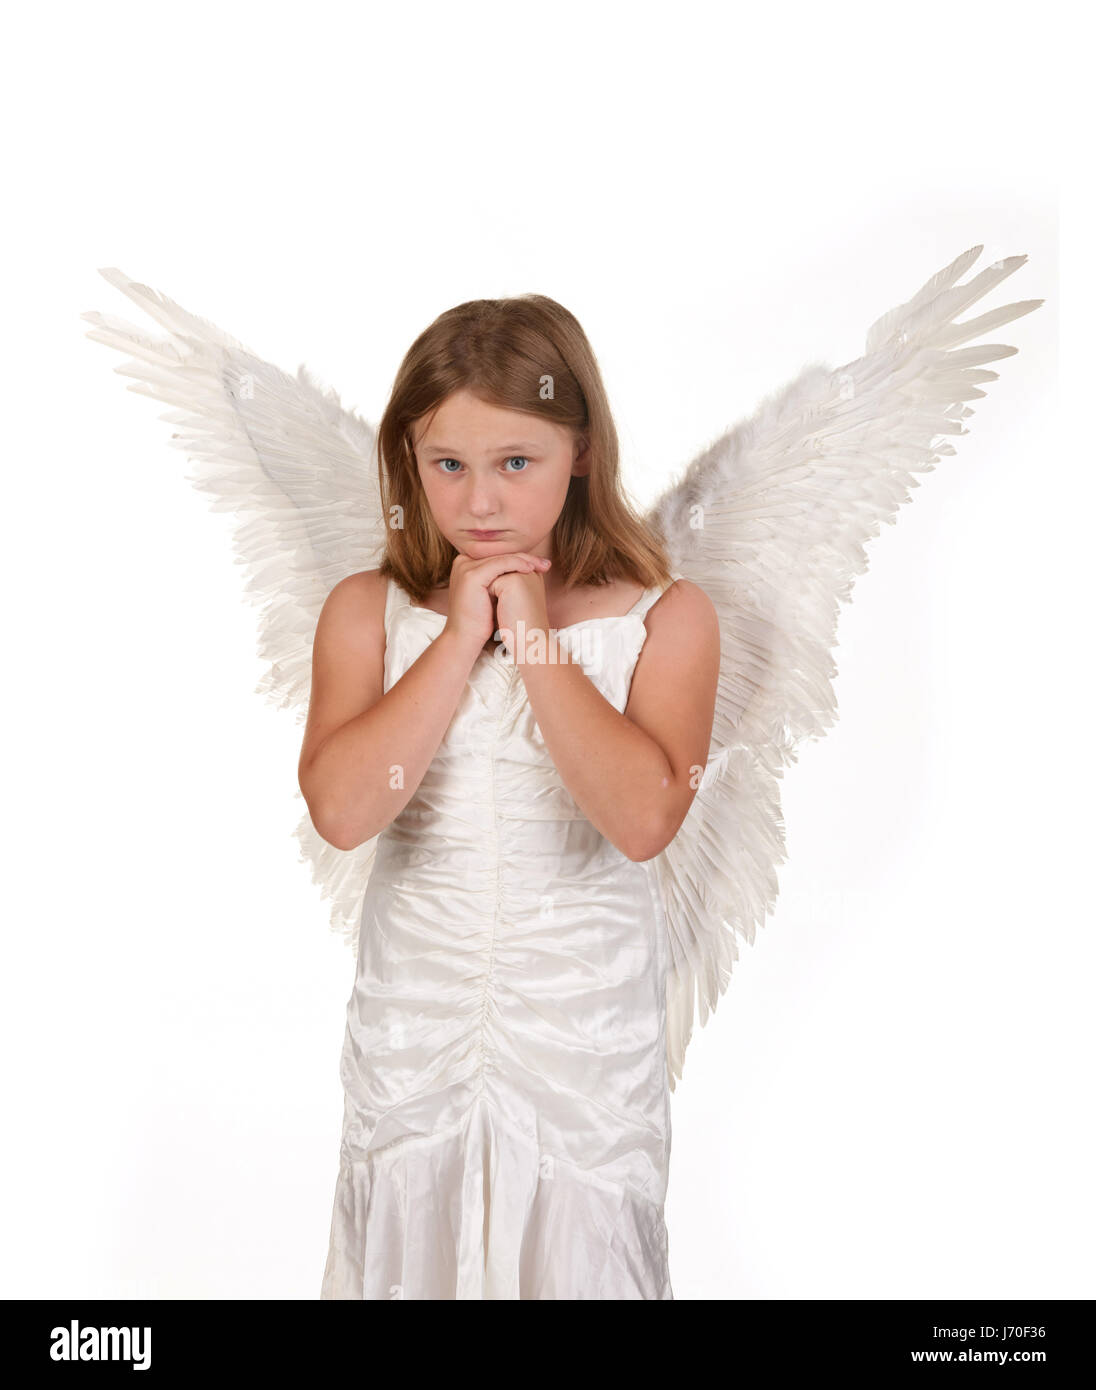 female heaven paradise angel angels innocence prayer young younger ...